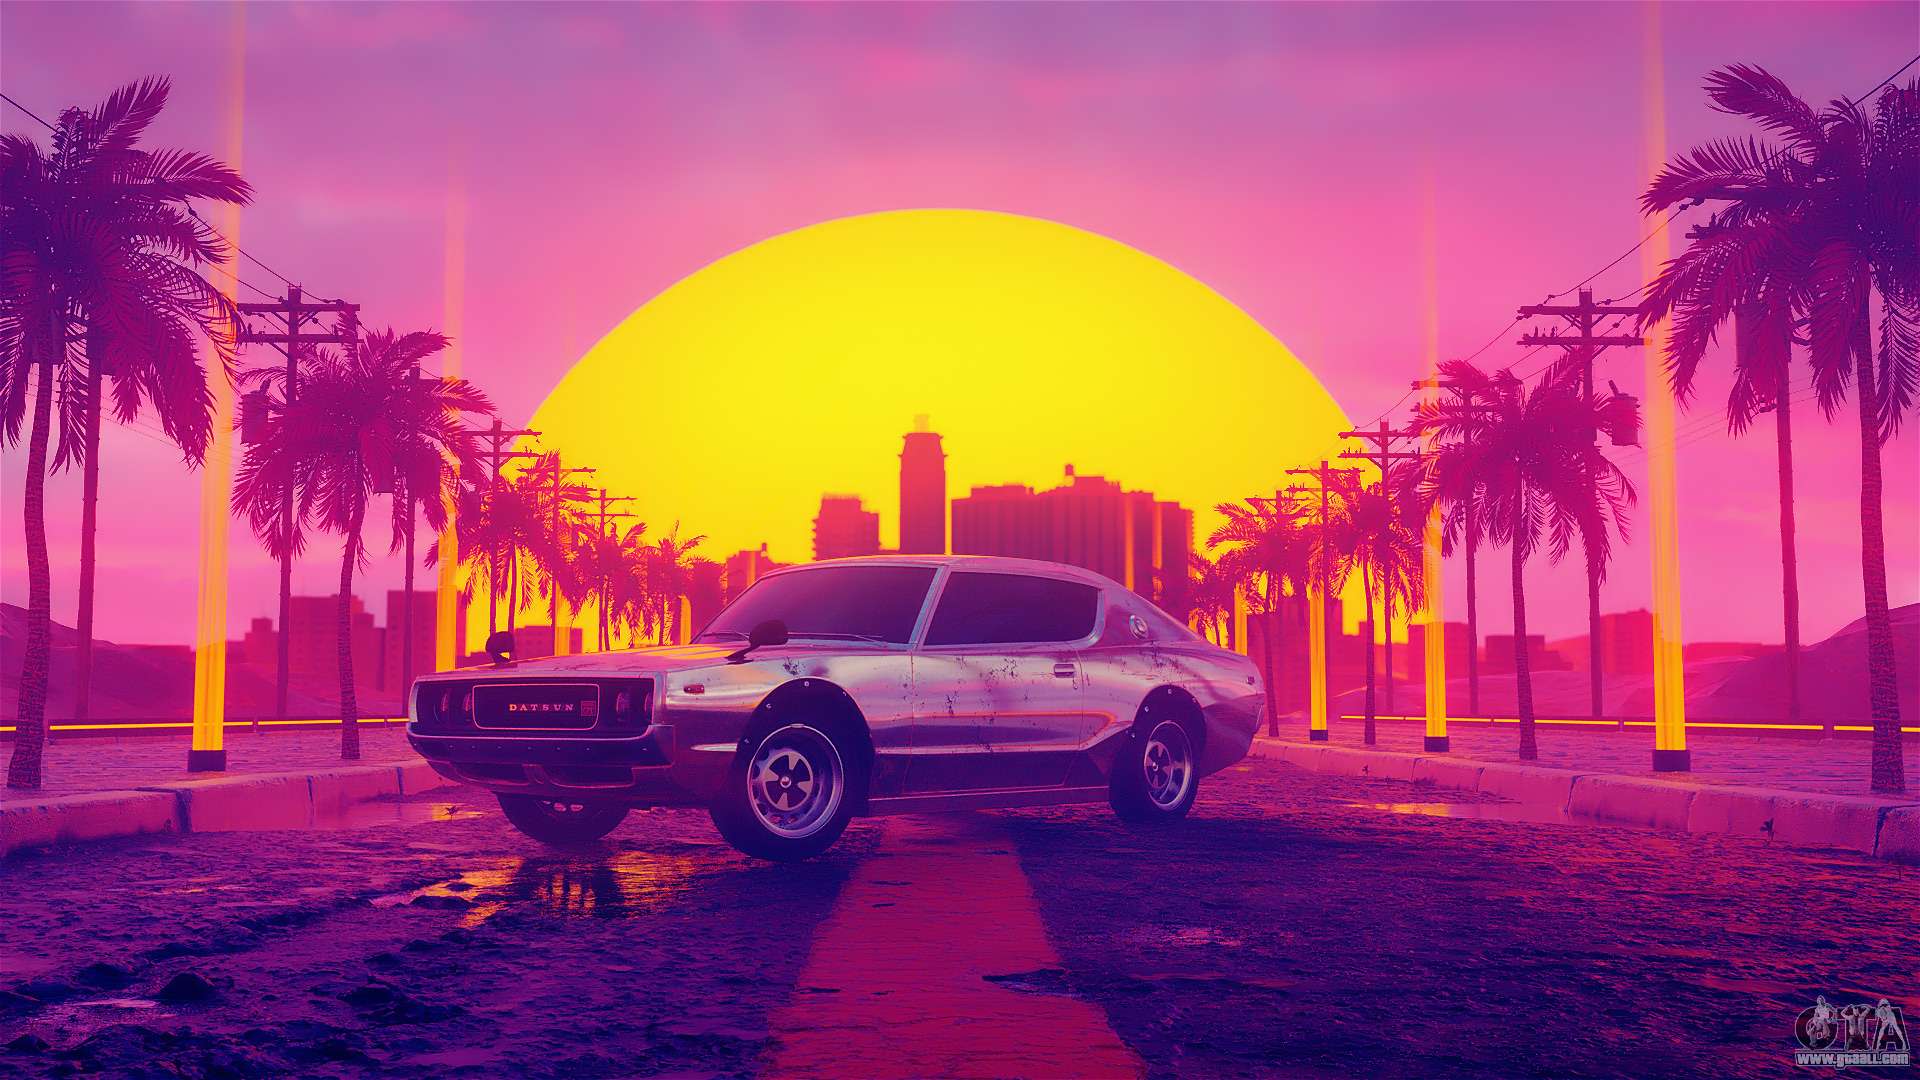 GTA 6 To Be Set In Vice City Massive Leak Containing 90 Videos Confirms   News18